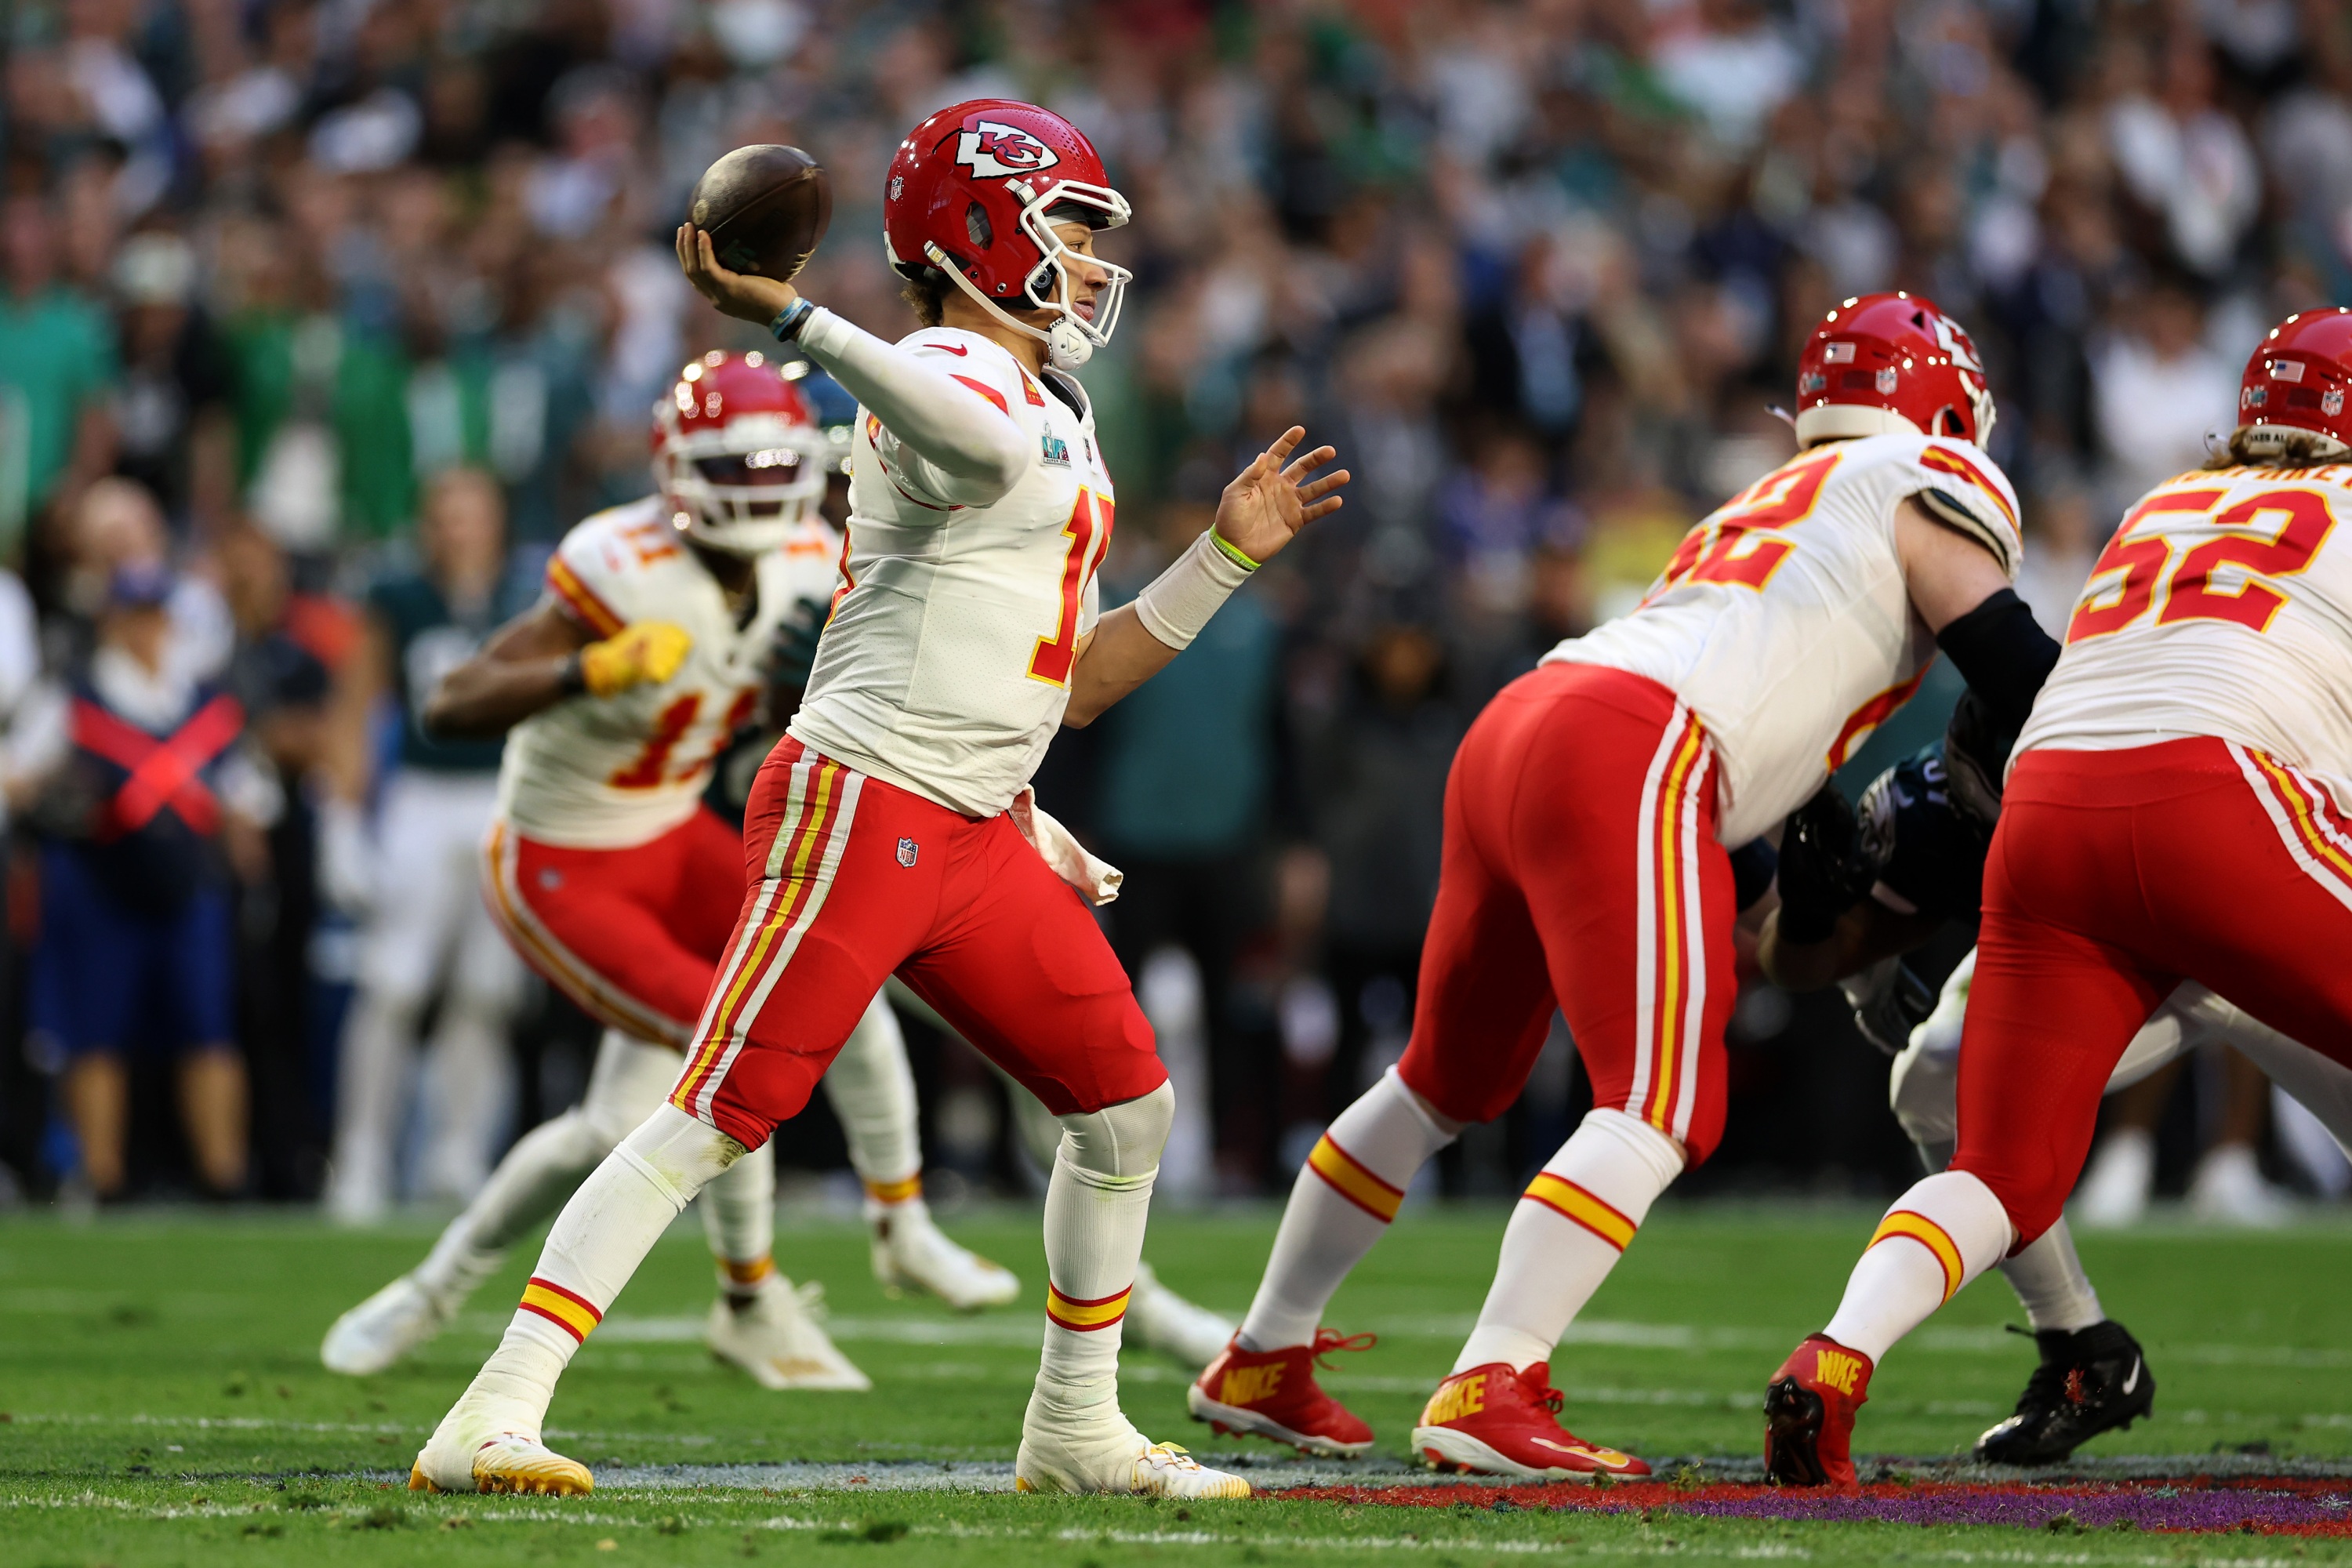 GLENDALE, ARIZONA - FEBRUARY 12: Patrick Mahomes #1  15 of the Kansas City Chiefs throws a pass against the Philadelphia Eagles during the second quarter of Super Bowl LVII at State Farm Stadium on February 12, 2023 in Glendale, Arizona.  (Photo by Christian Petersen/Getty Images)